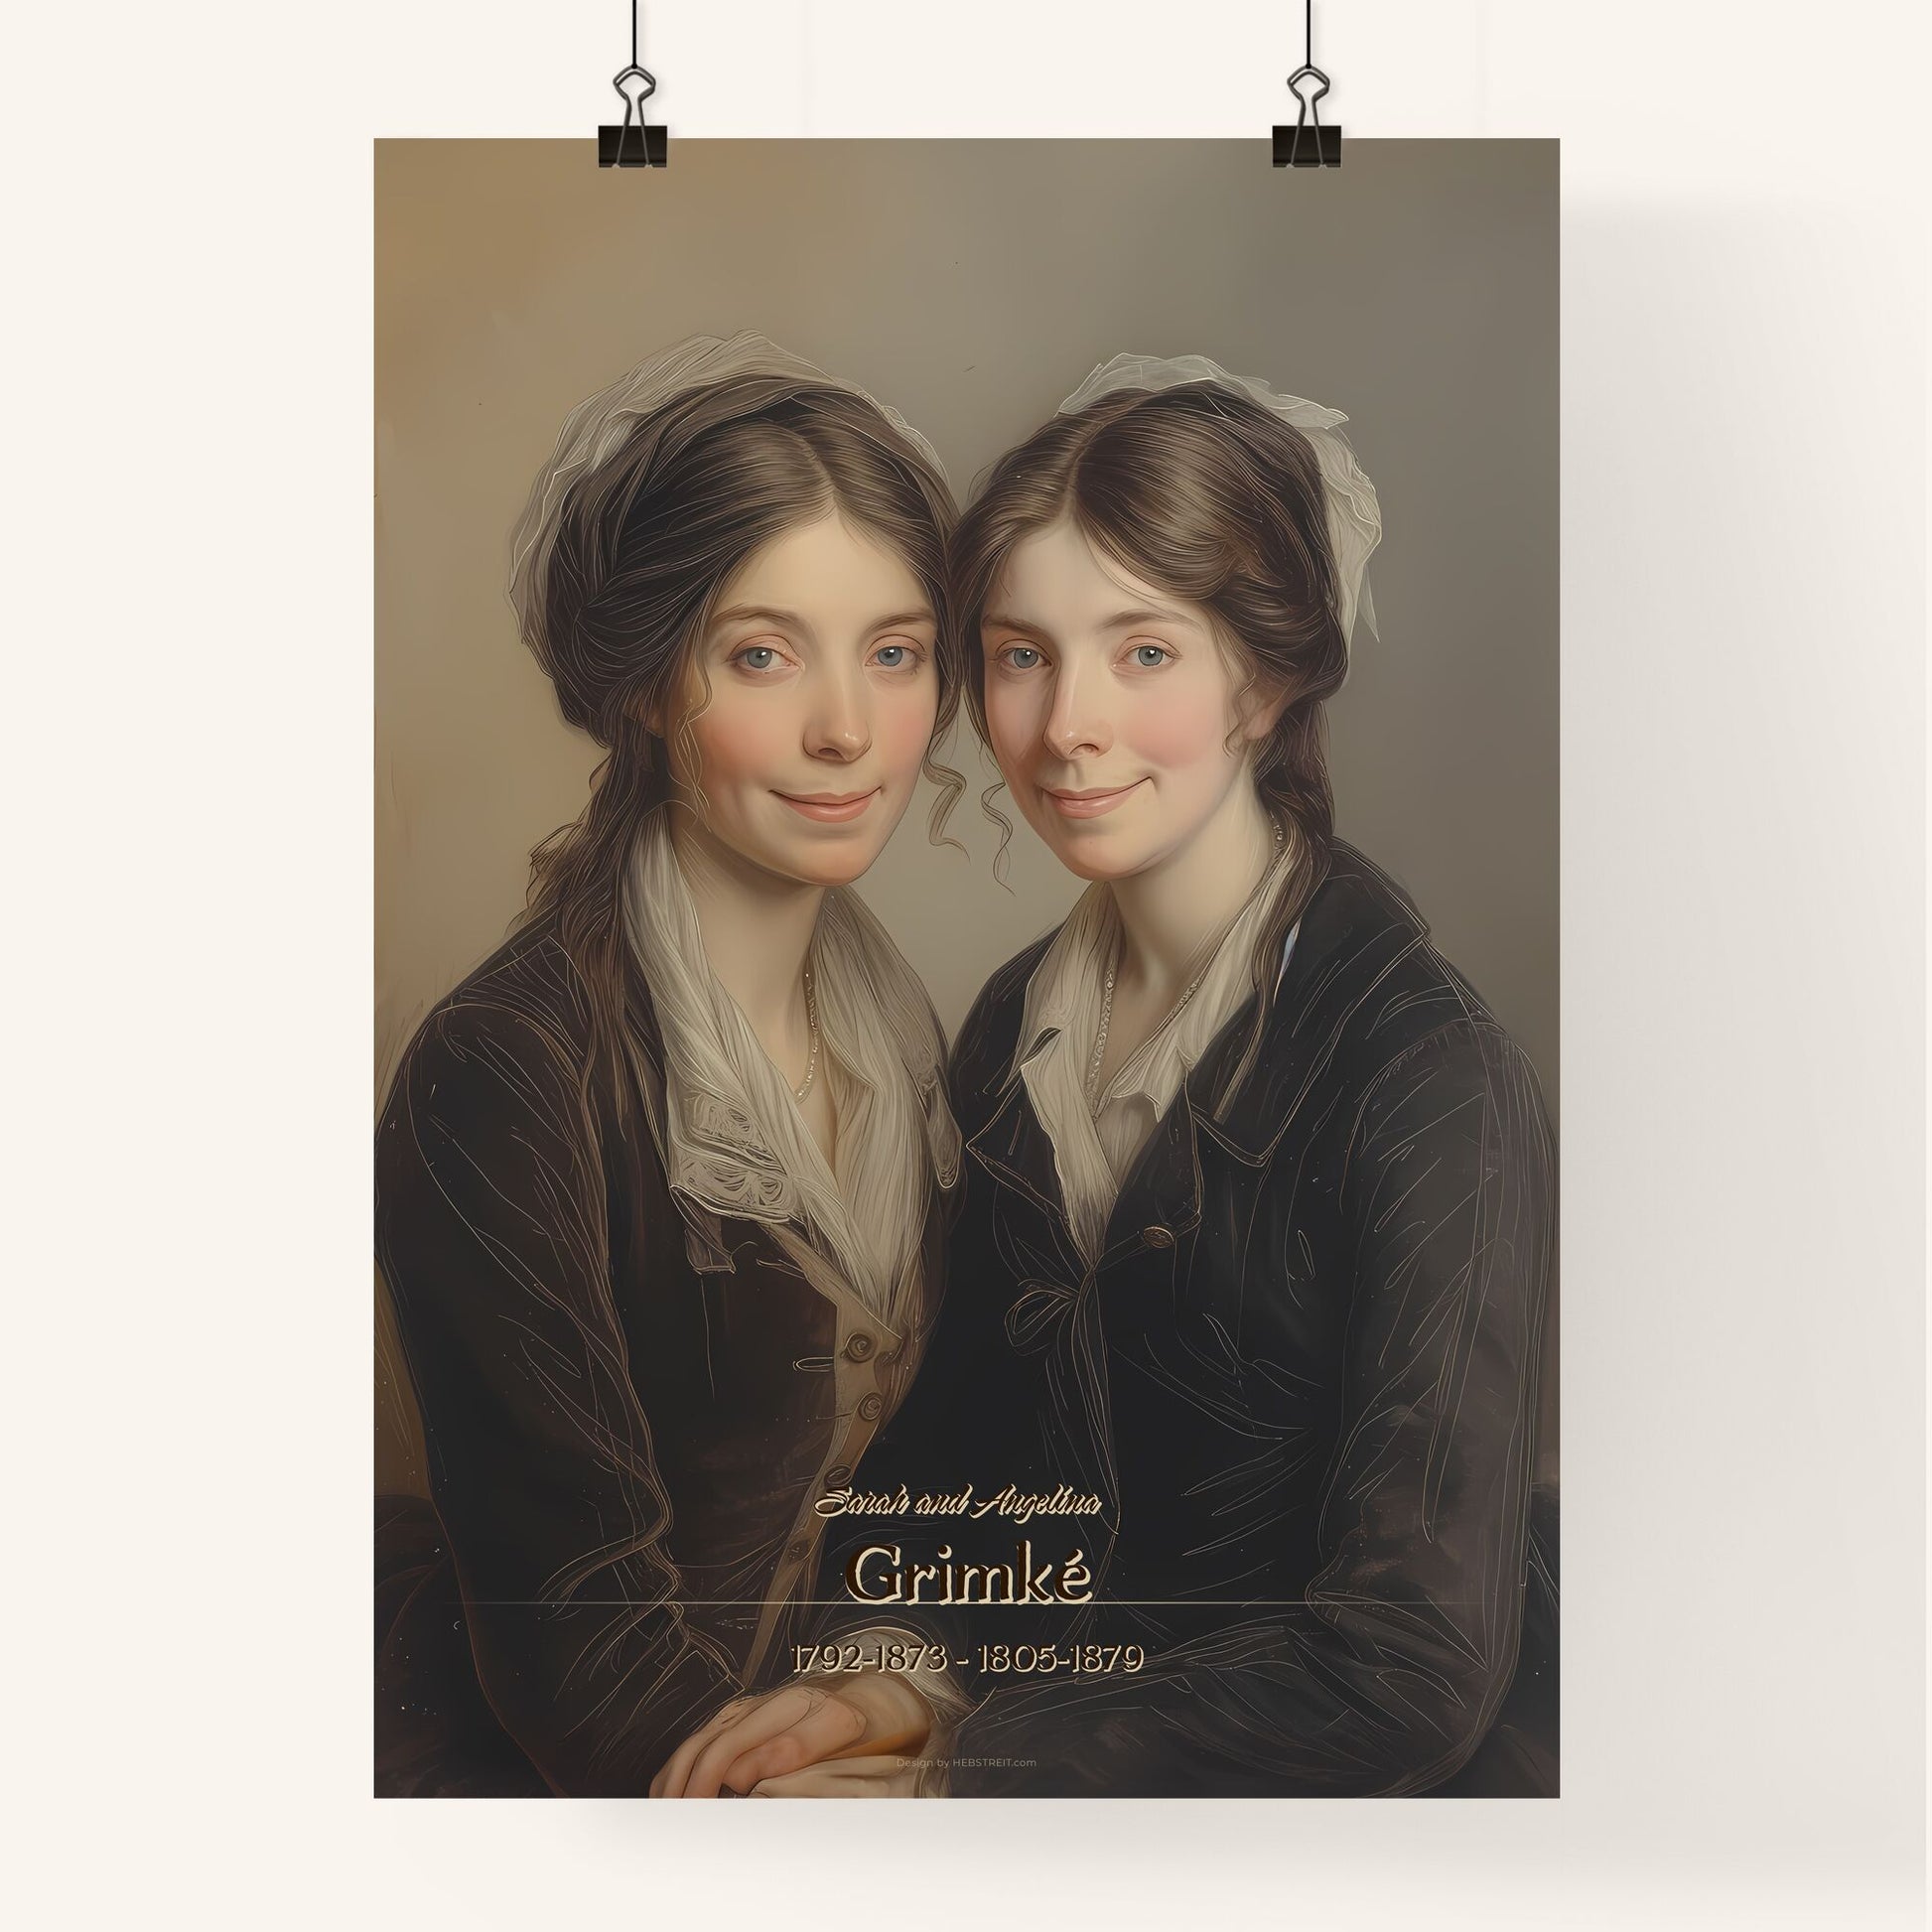 Sarah and Angelina , Grimké, 1792-1873 - 1805-1879, A Poster of a couple of women posing for a picture Default Title